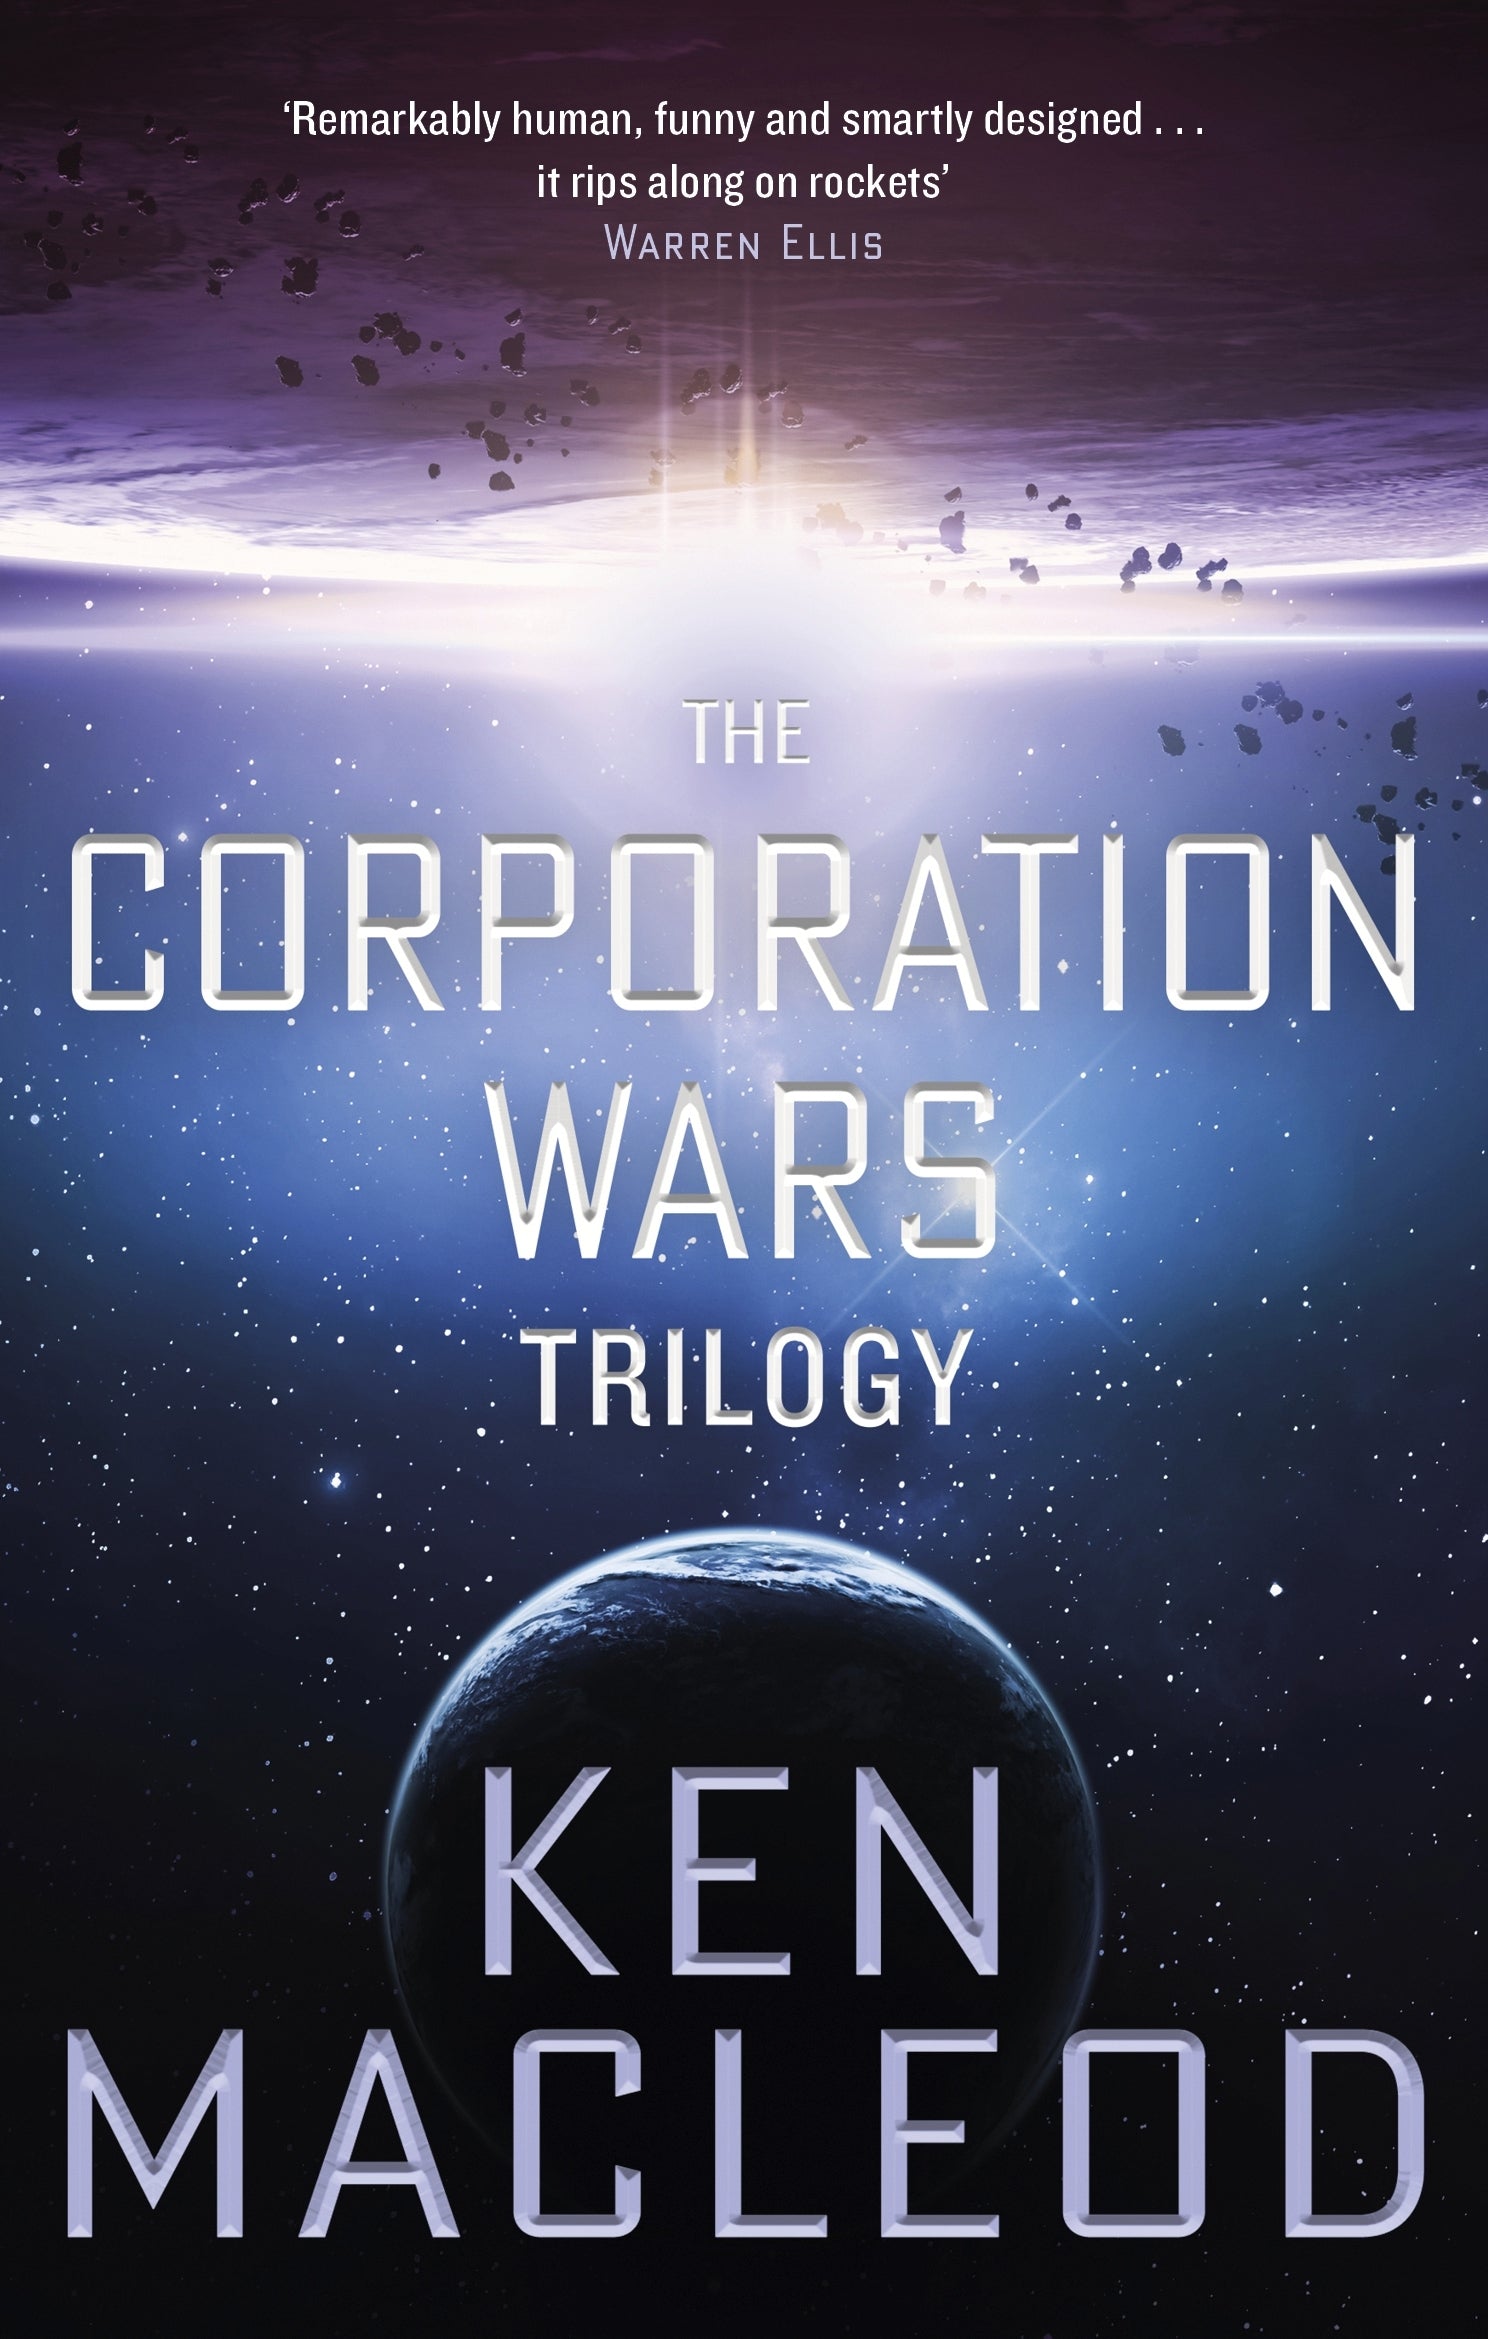 The Corporation Wars Trilogy by Ken MacLeod